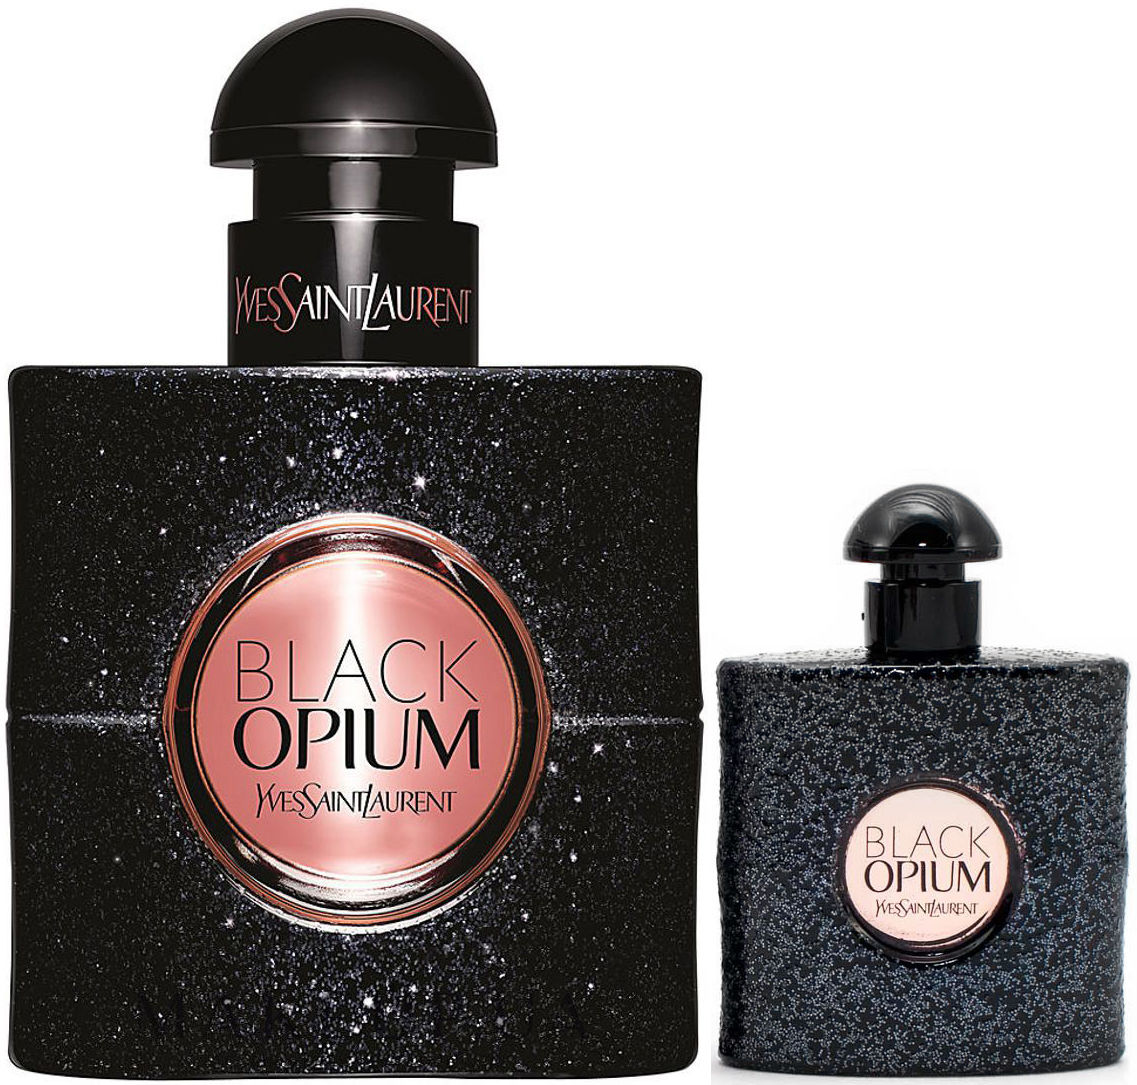 Opium over red